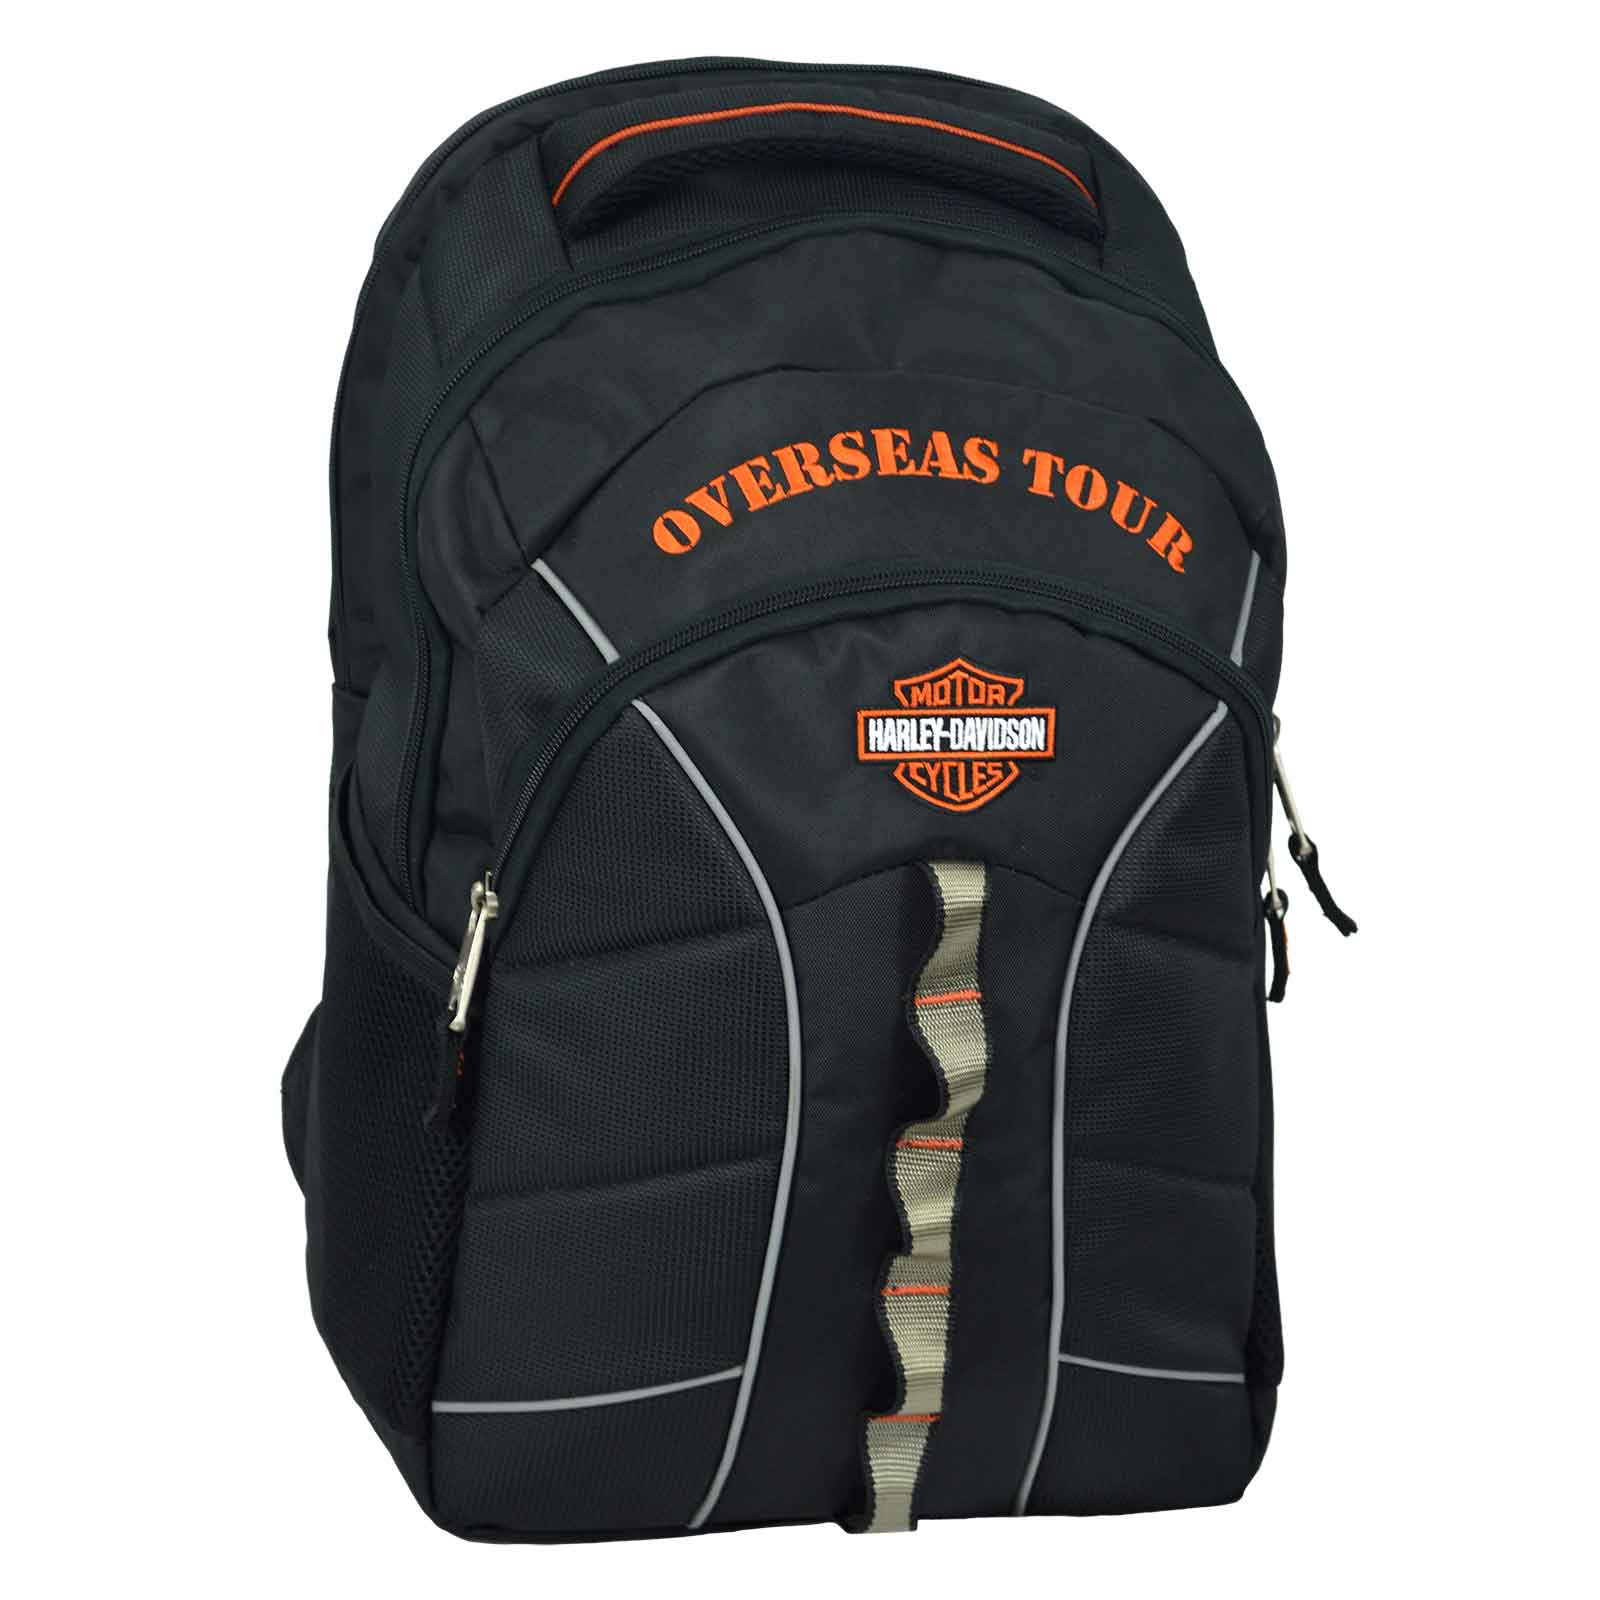 Harley-Davidson Military "Laptop Fit" Backpack - Overseas Tour